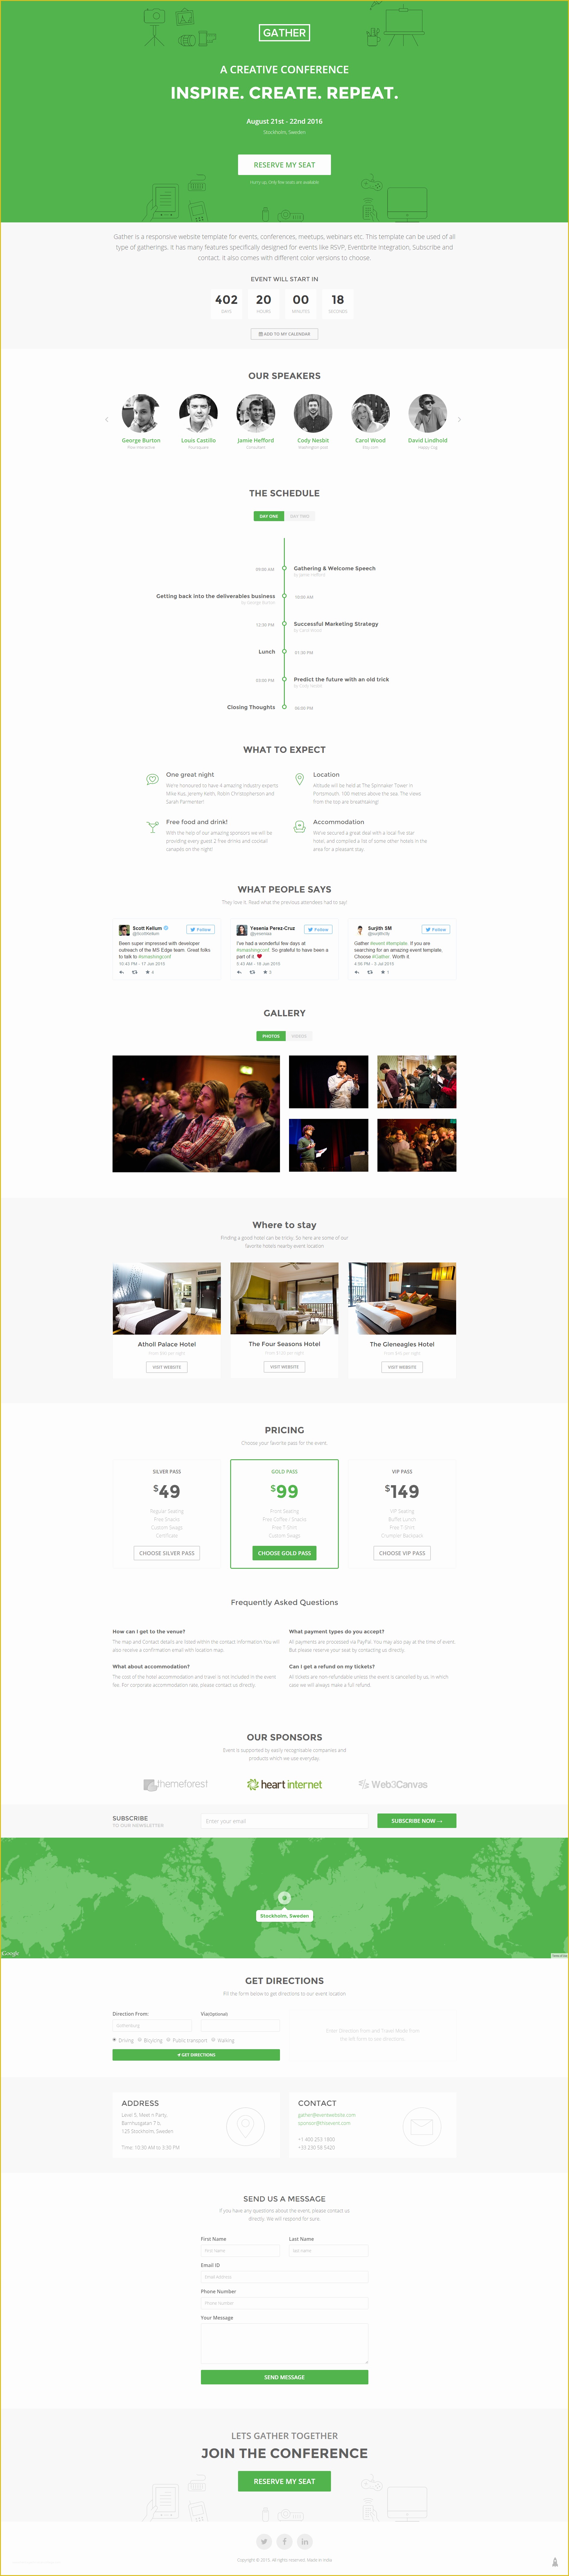 Event Landing Page Template Free Of event Landing Page Template Gather by Surjithctly